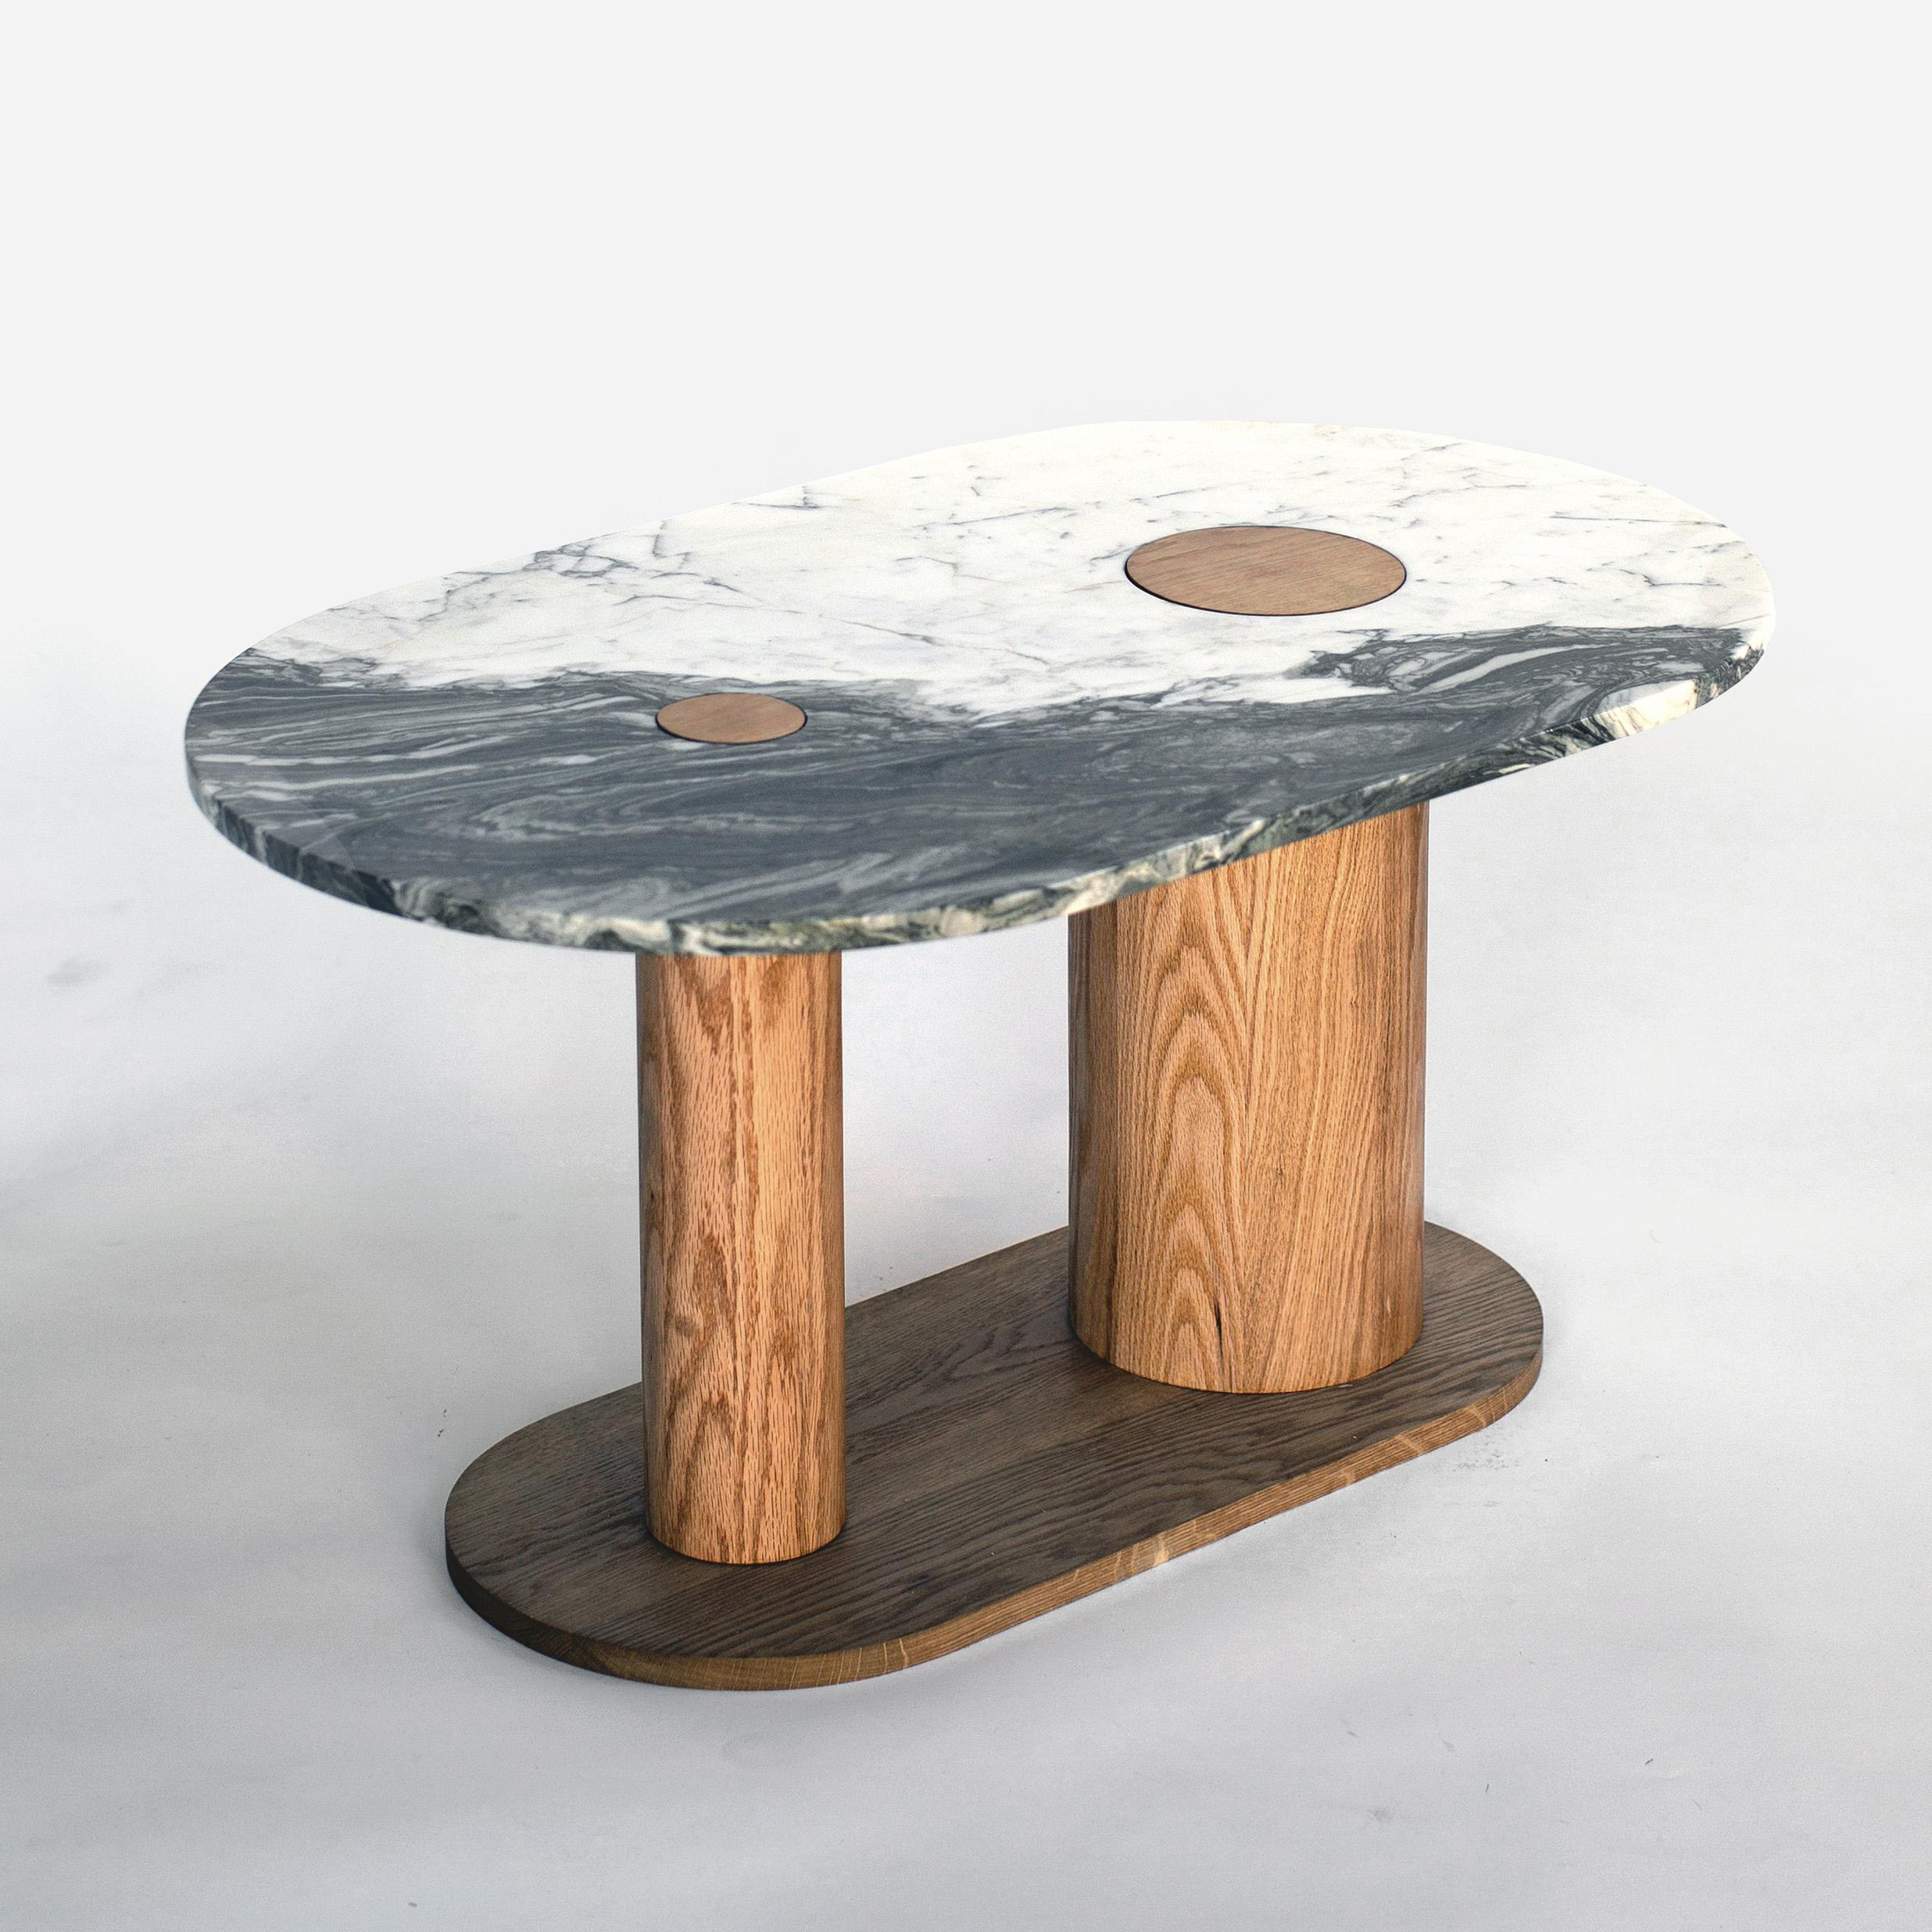 This coffee table comes in a shocking two-toned marble, cream white and green-tinted charcoal. Two cutouts in the marble top reveal the materiality of the asymmetrical legs below. The legs, made in solid white oak, are hand-lathed with an oiled